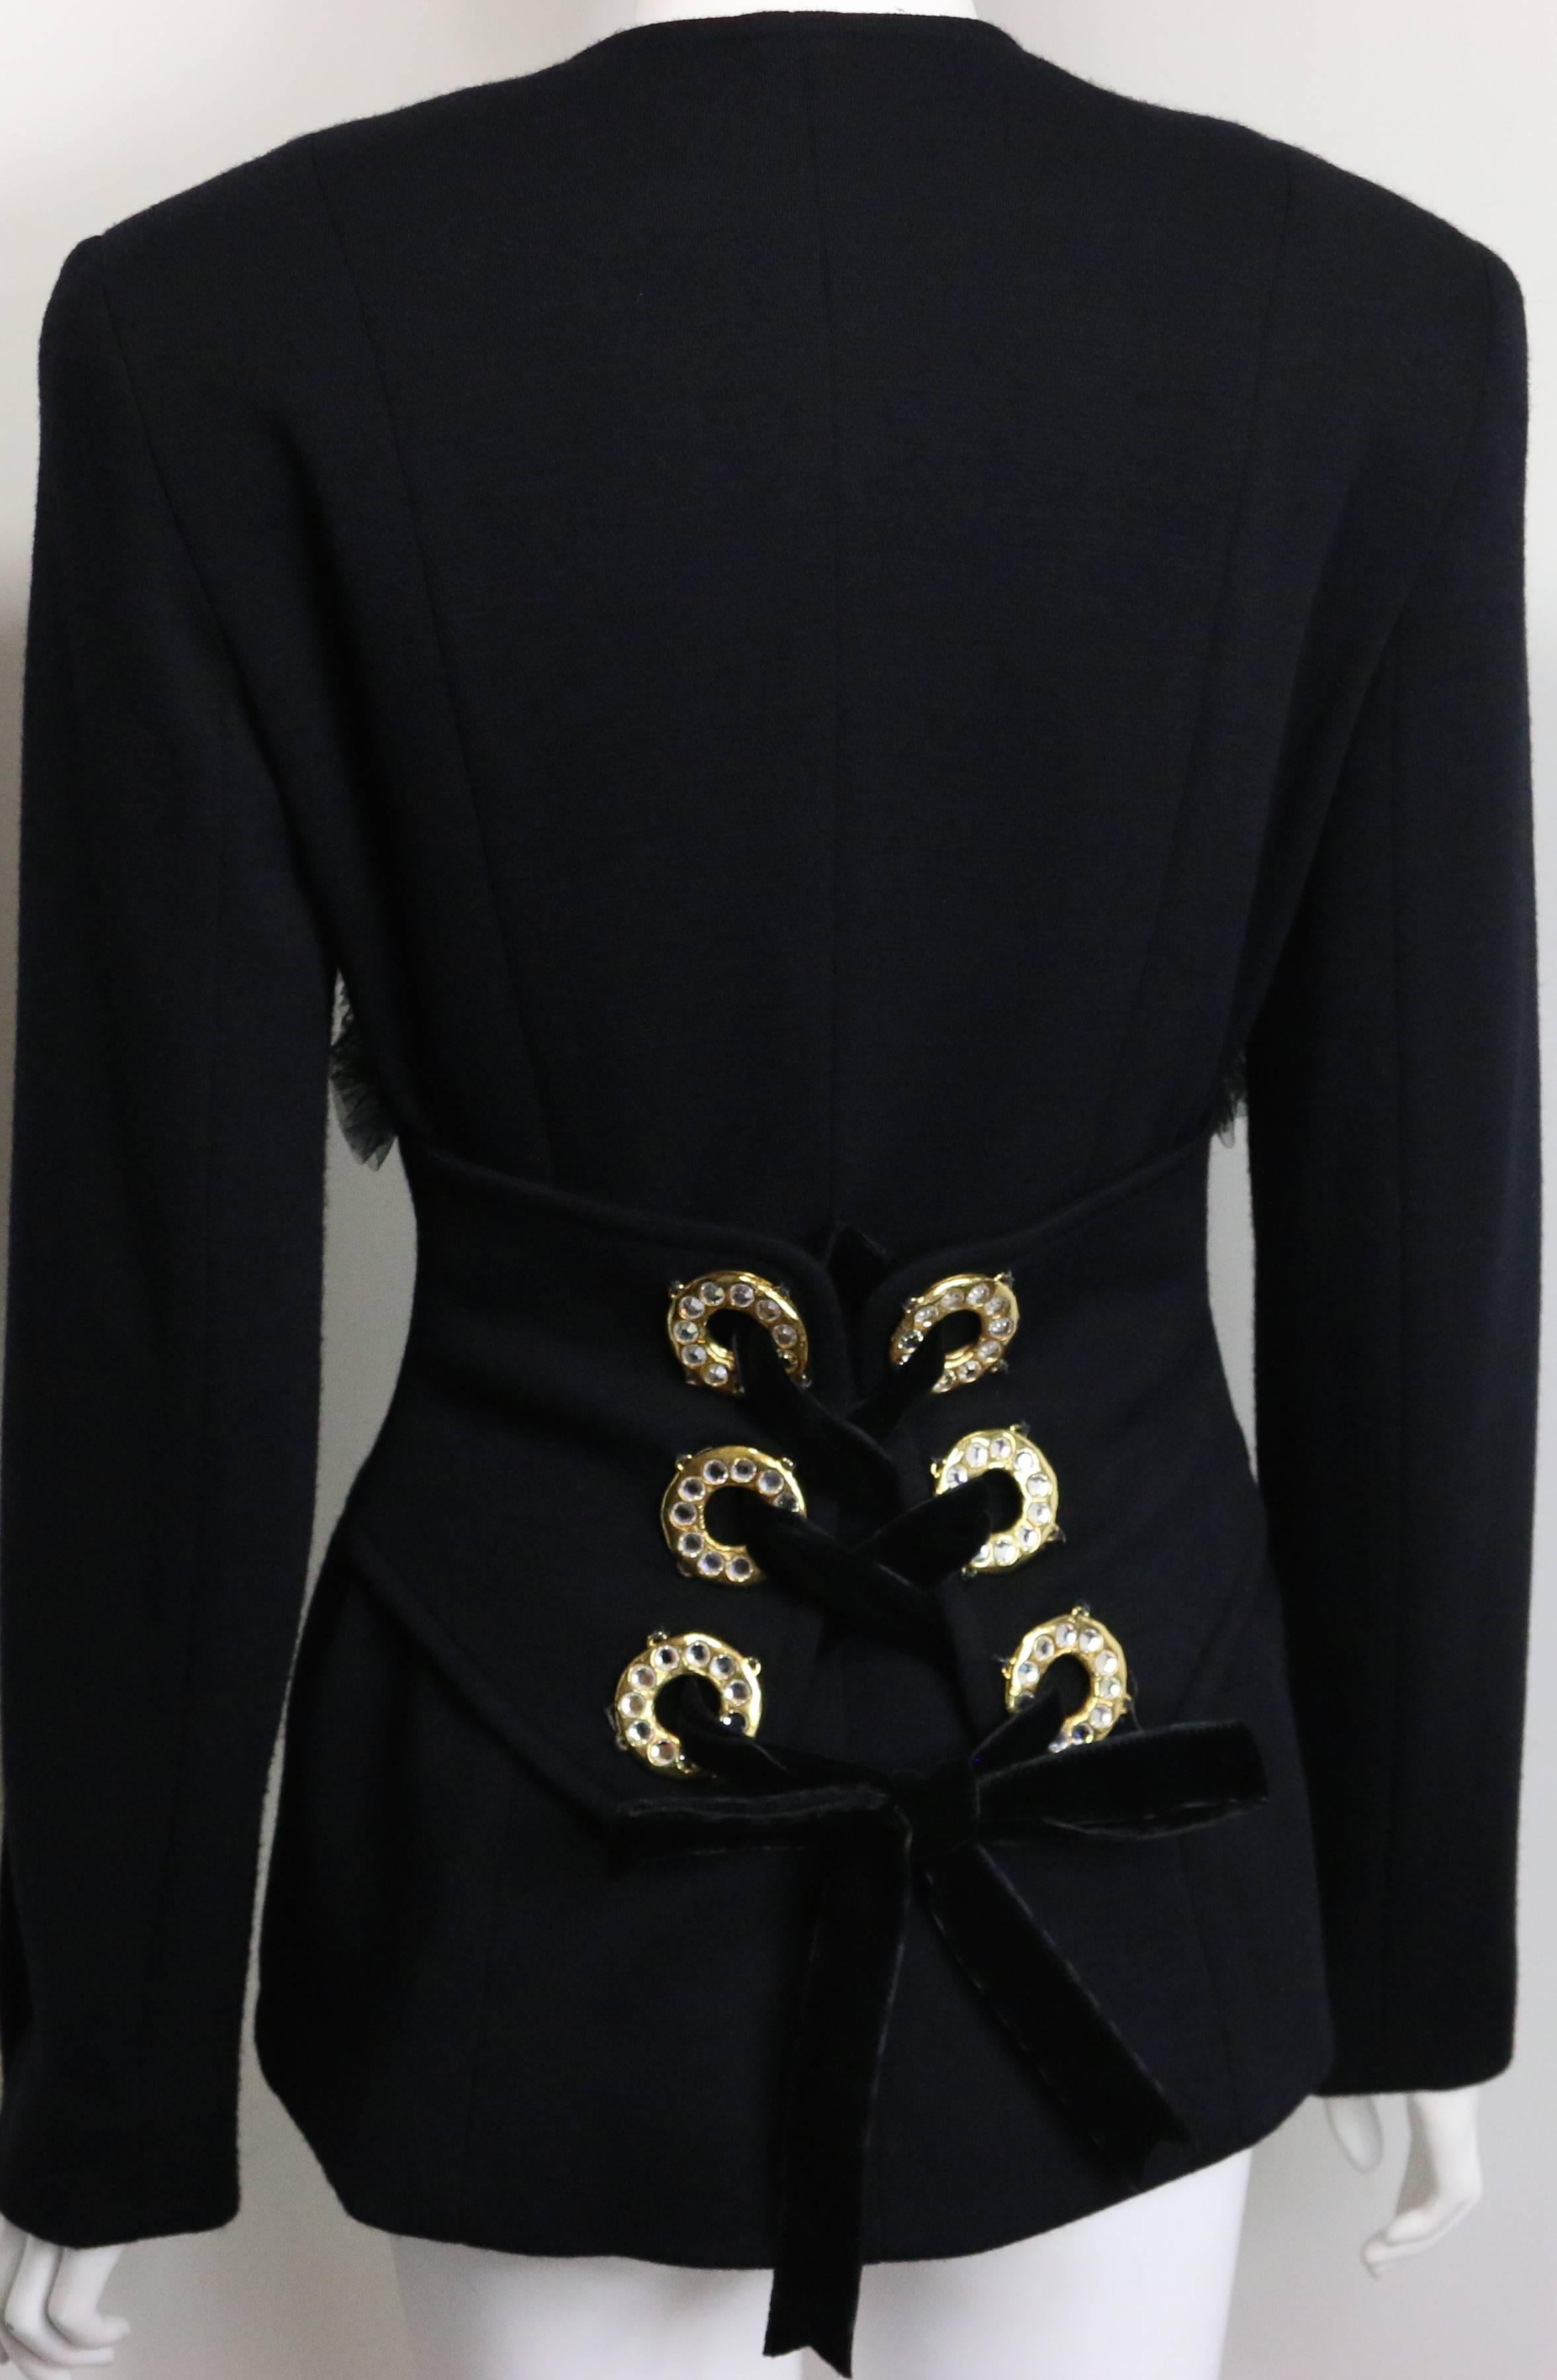 - Vintage 90s Gemma Kahng black wool shawl jacket. 

- Featuring five signatures front black gold toned flowers with rhinestones buttons fastening. Four gold buttons on each cuff. Front Ruffles Details. A statement details at the back with six